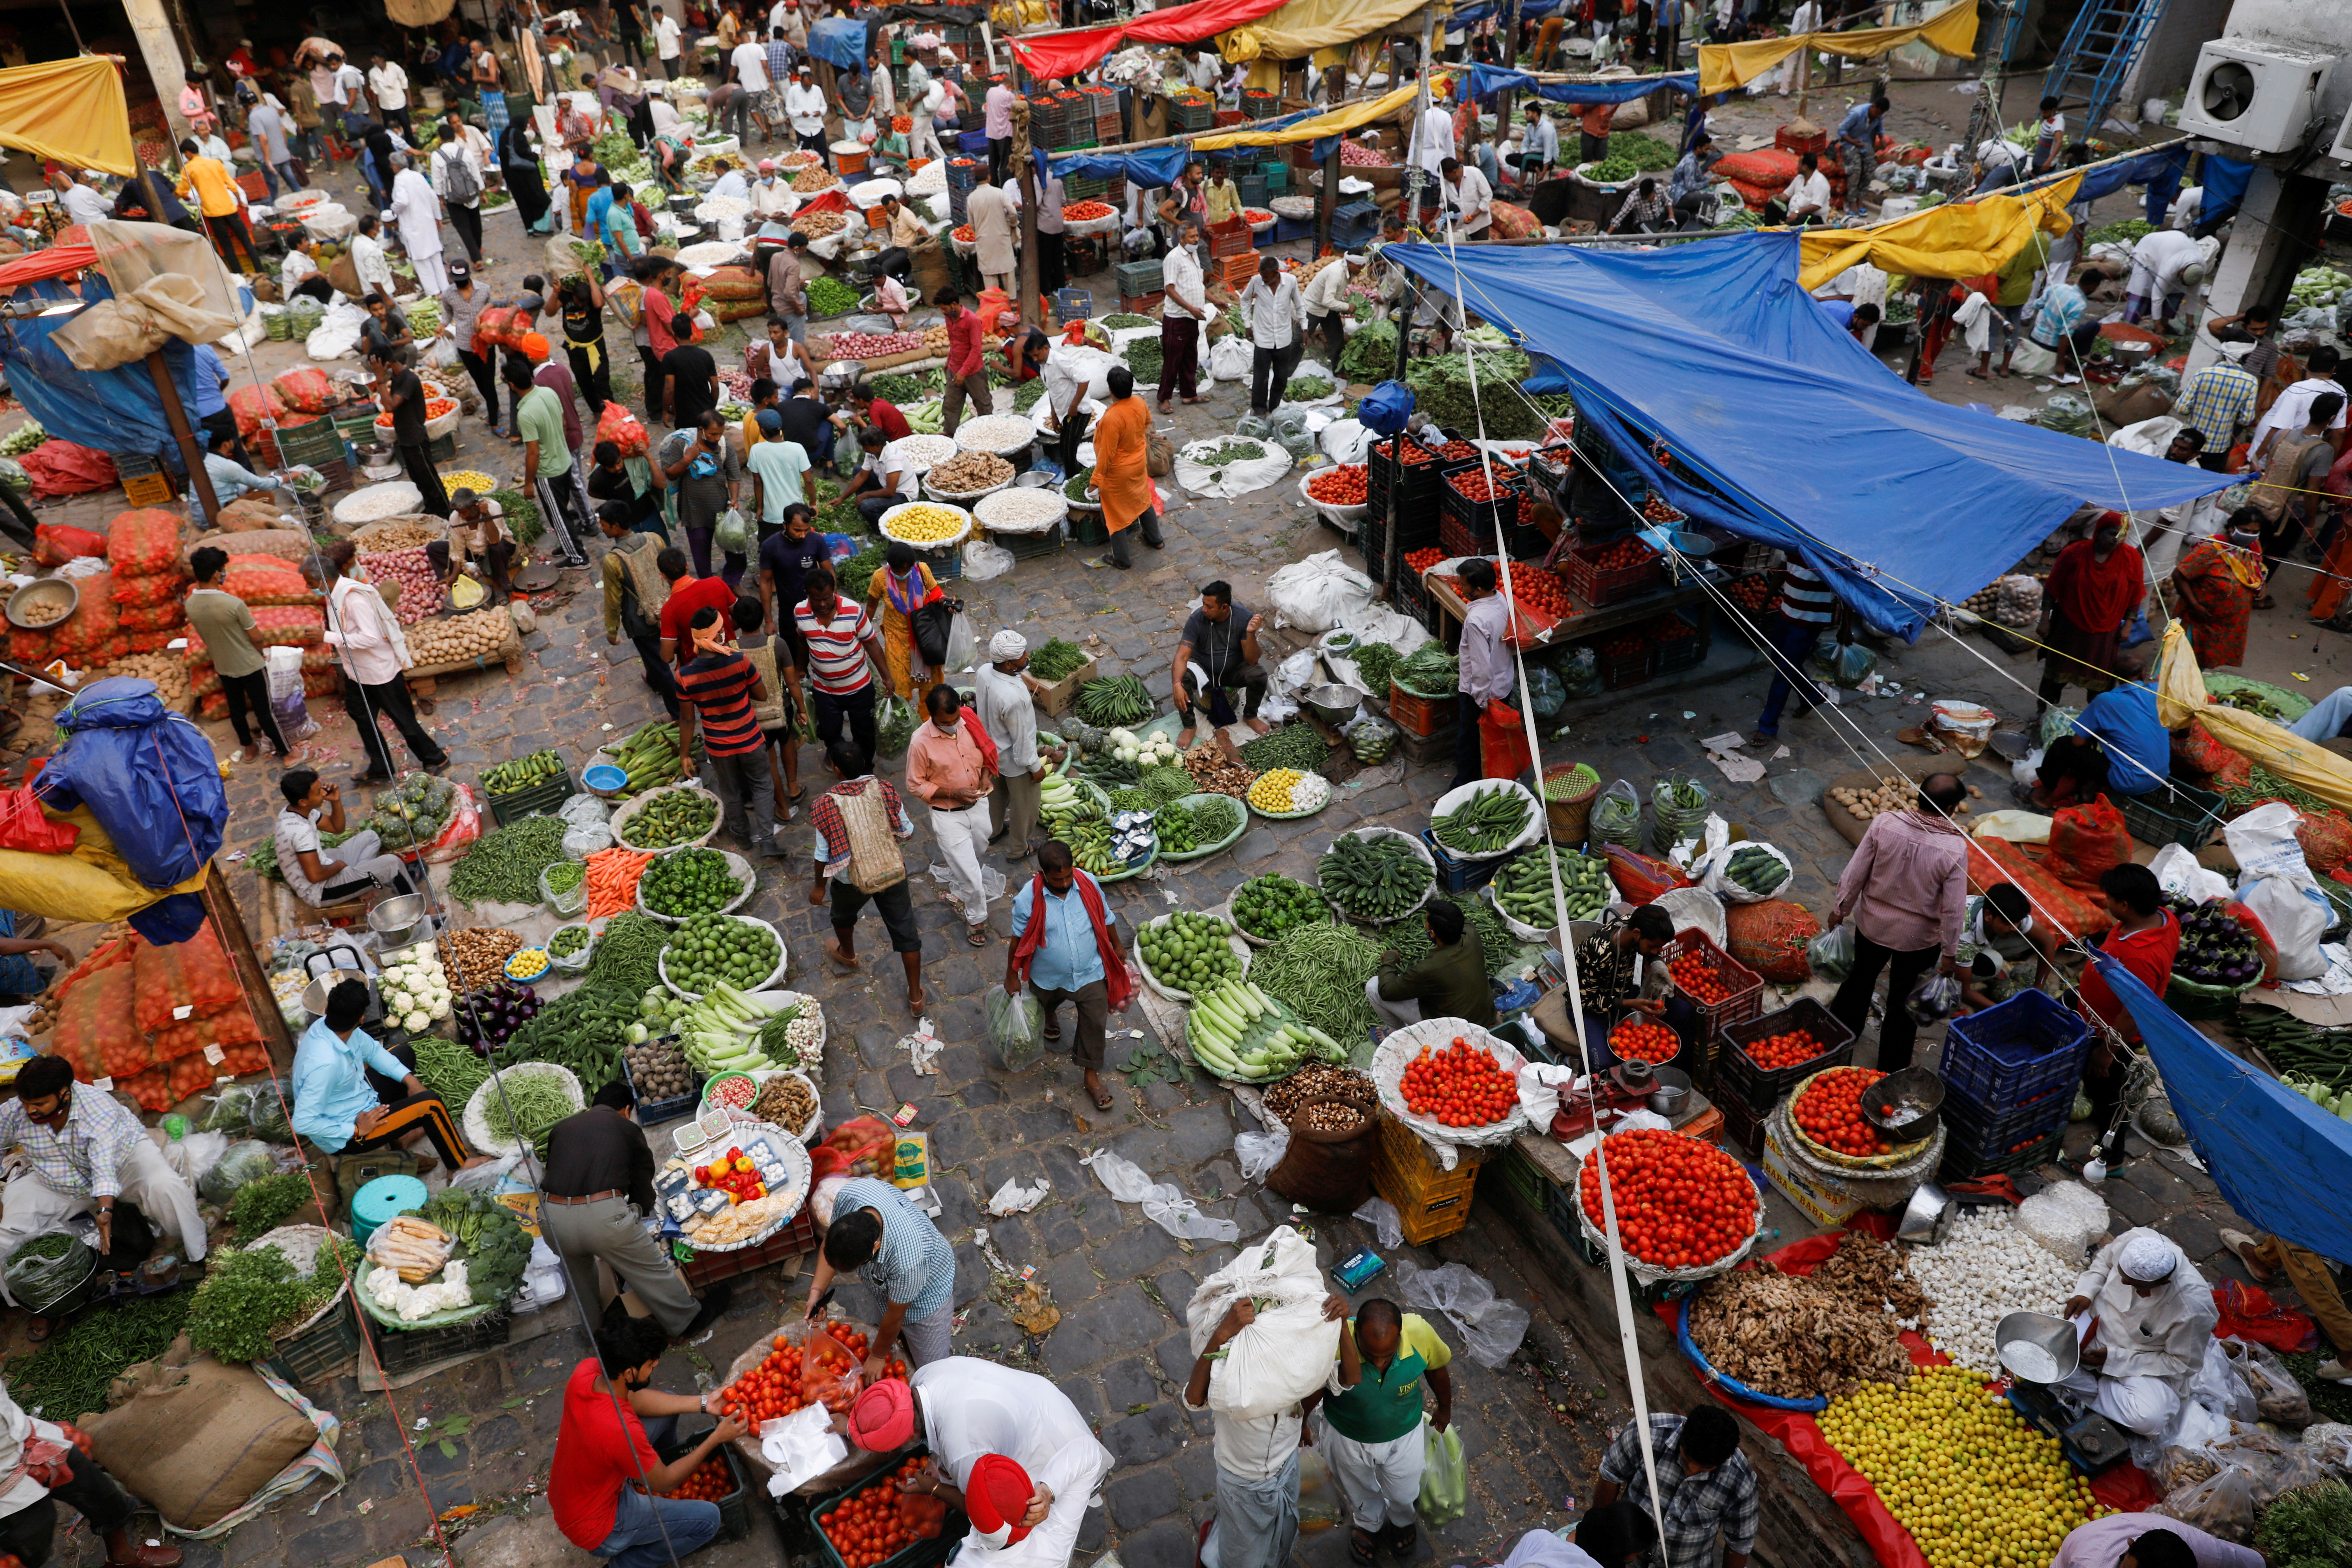 People shop at a crowded wholesale vegetable market after authorities eased coronavirus restrictions, following a drop in COVID-19 cases, in the old quarters of Delhi, India, June 23, 2021. REUTERS/Adnan Abidi